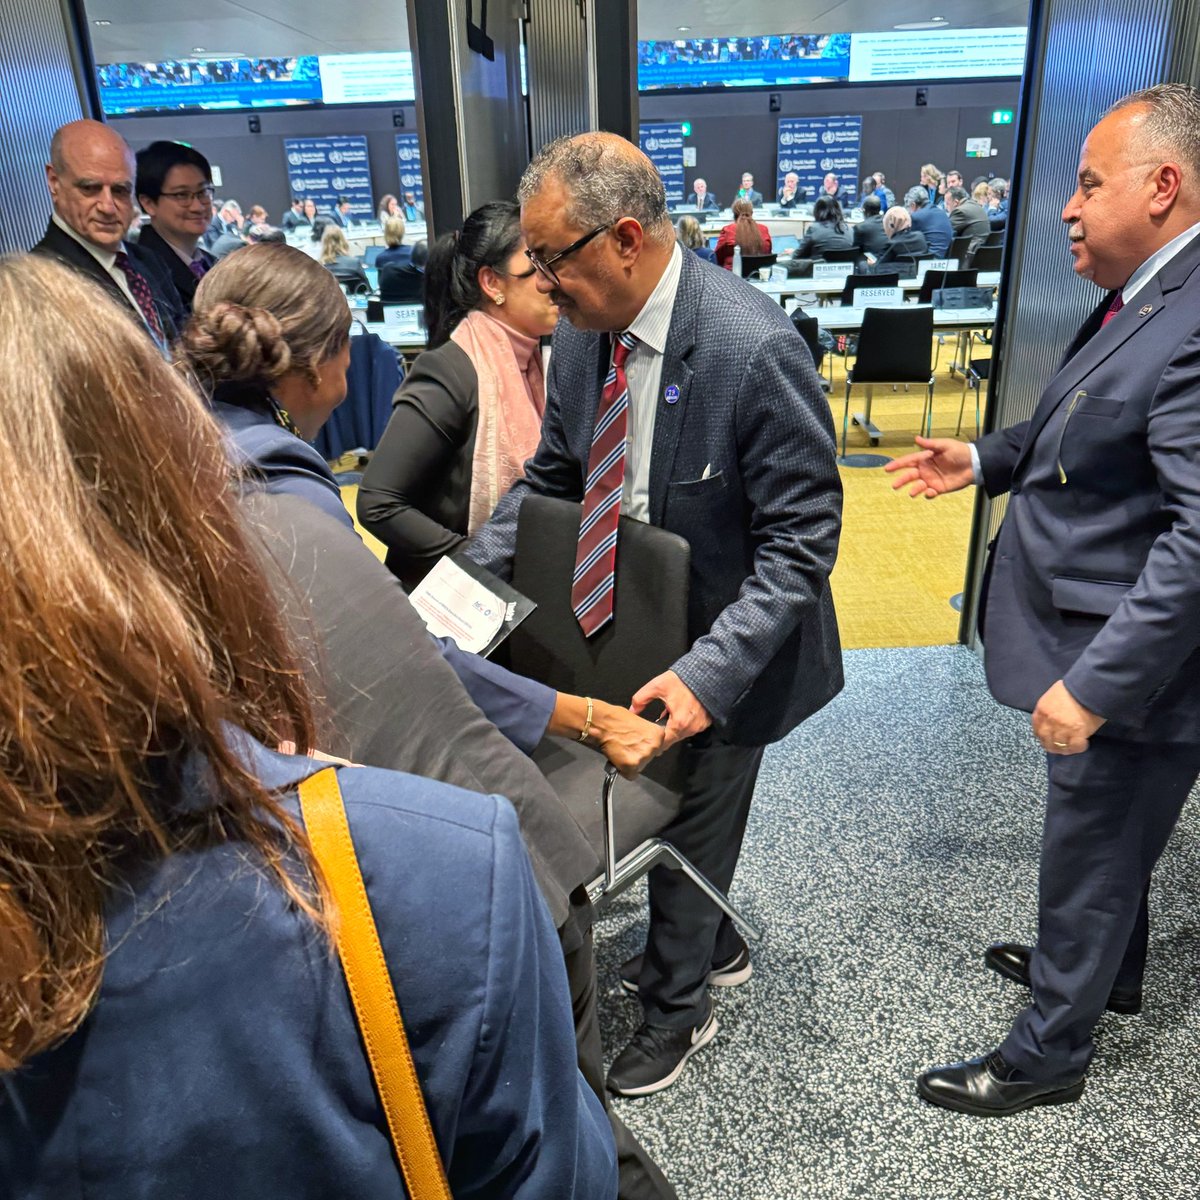 Global health diplomacy can be tough. But there are also human moments. Last night, NGOs were standing in line OUTSIDE the meeting room, waiting to deliver our statements. It’s a long wait. And @drtedros on his way out of the #EB154 meeting saw our predicament and decided to help